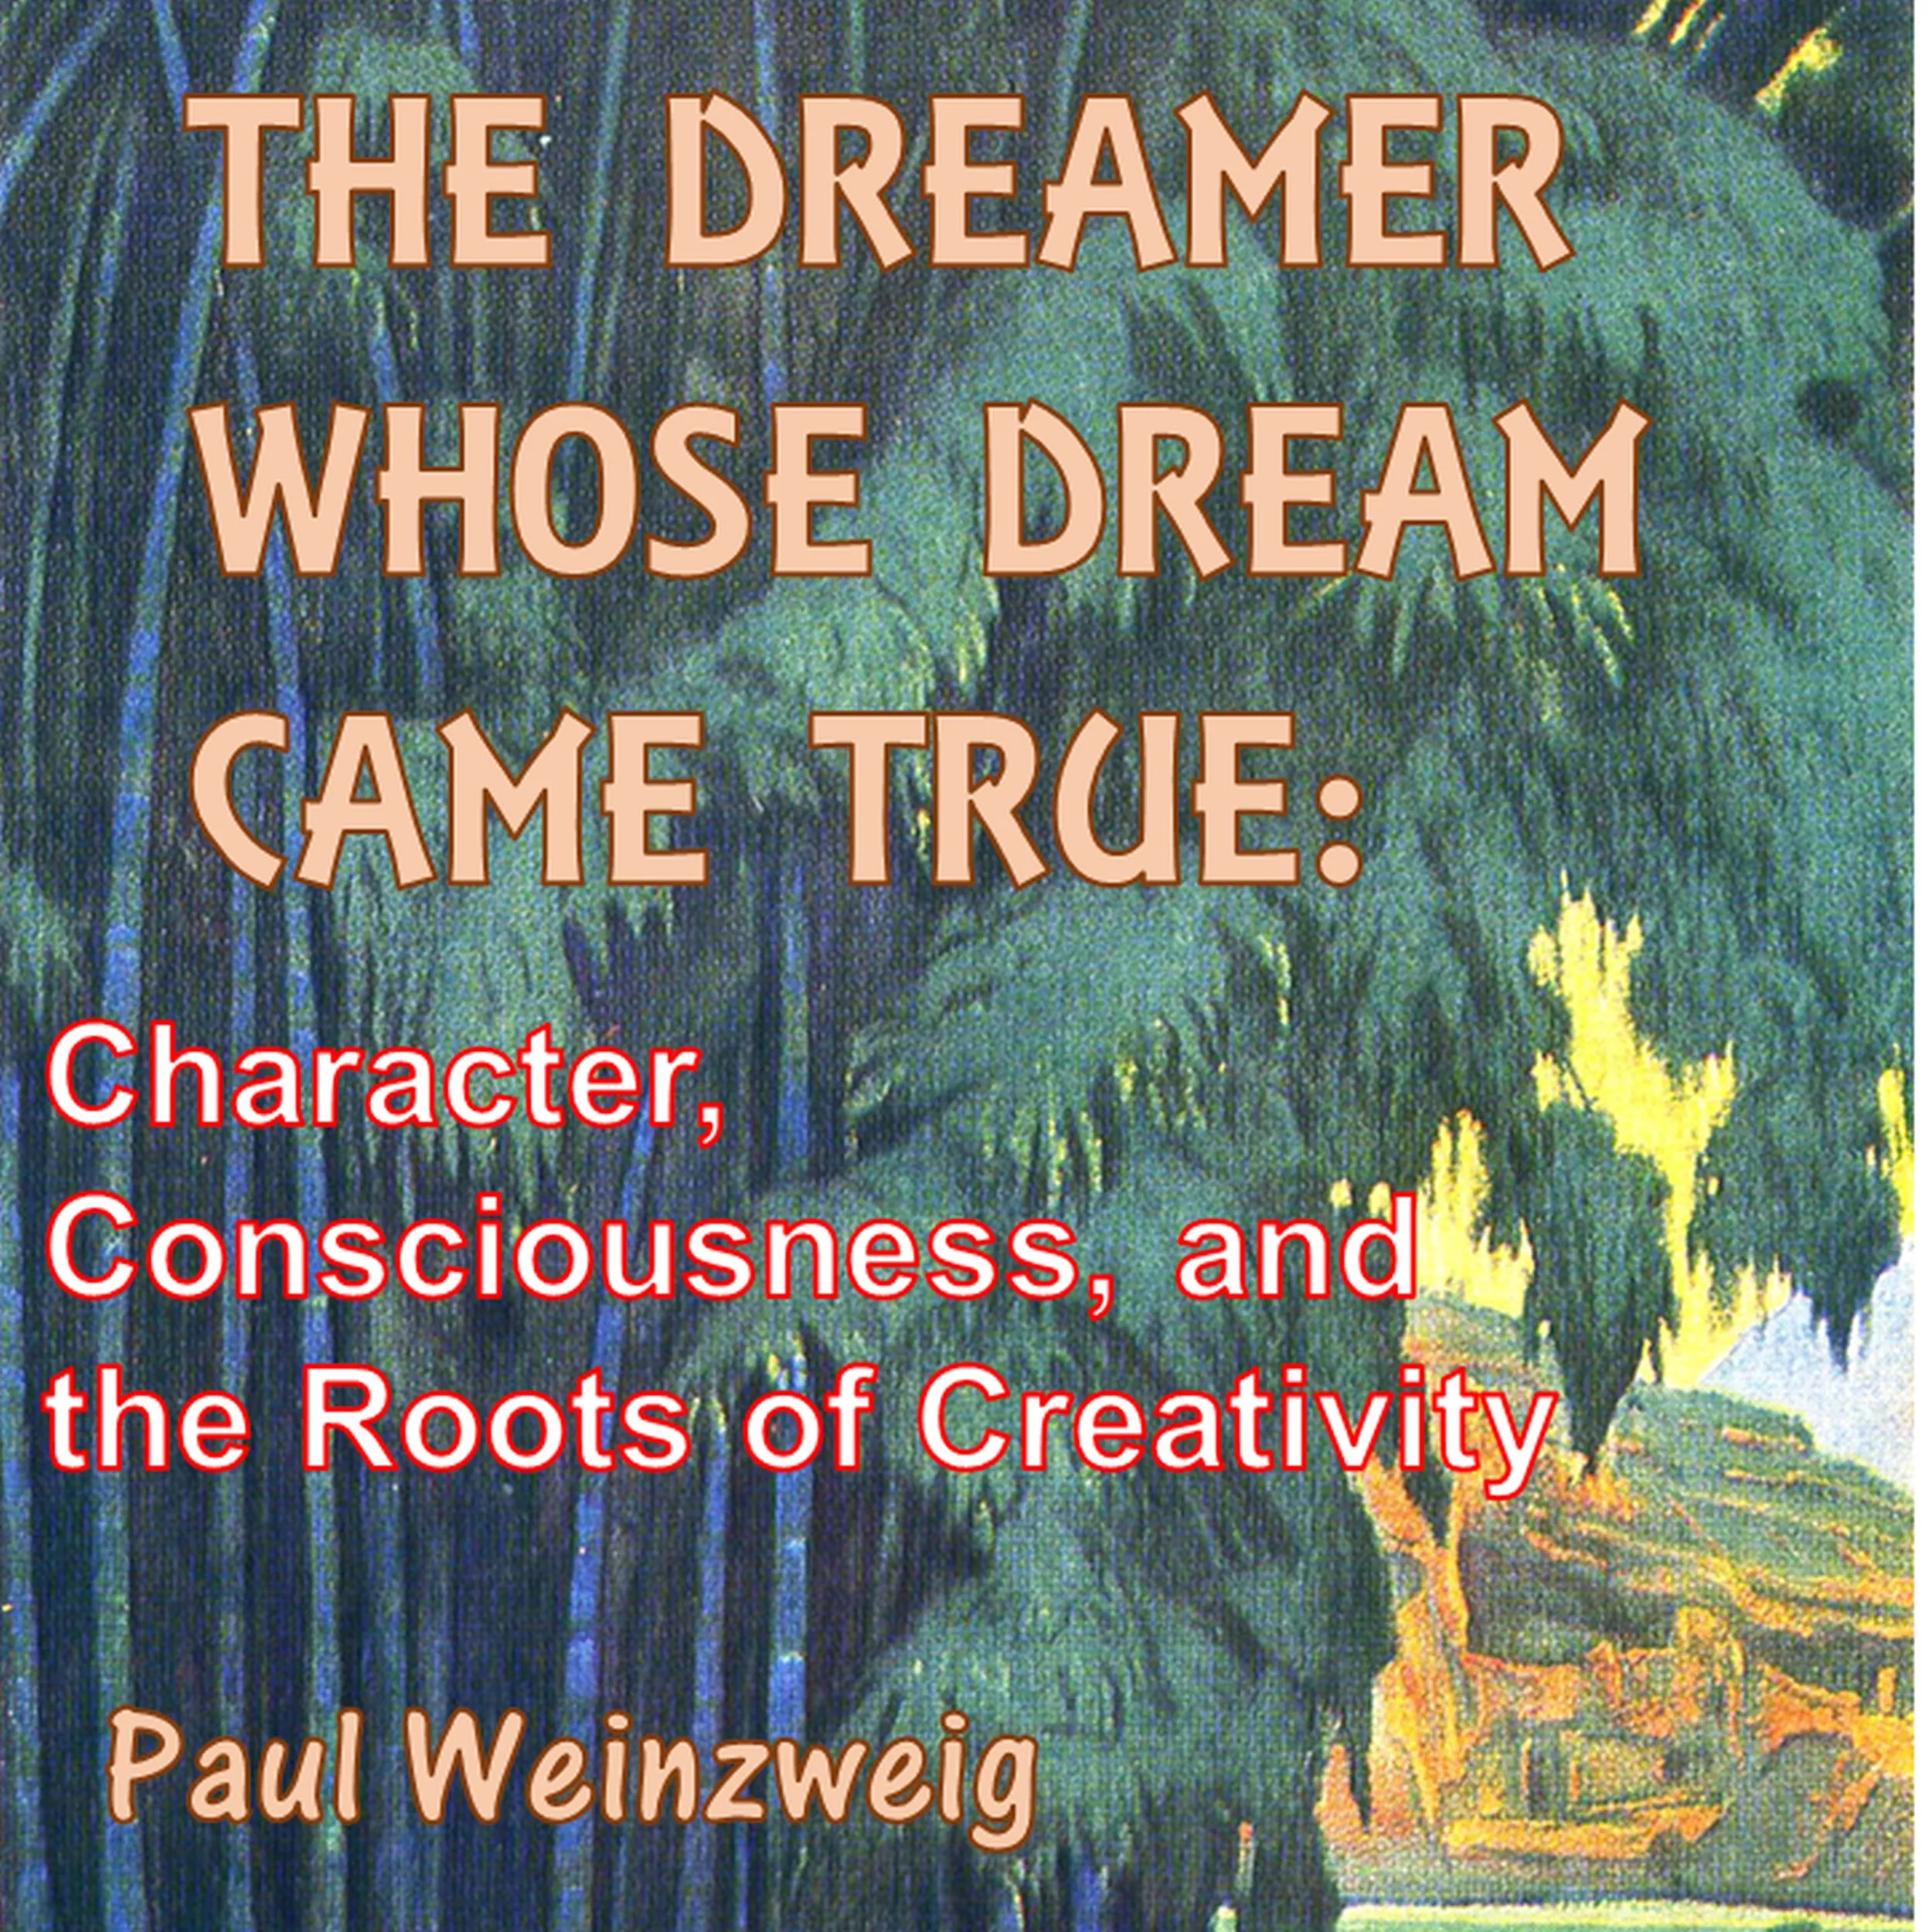 The Dreamer Whose Dream Came True: Character, Consciousness, and The Roots of Creativity Audiobook by Paul Weinzweig